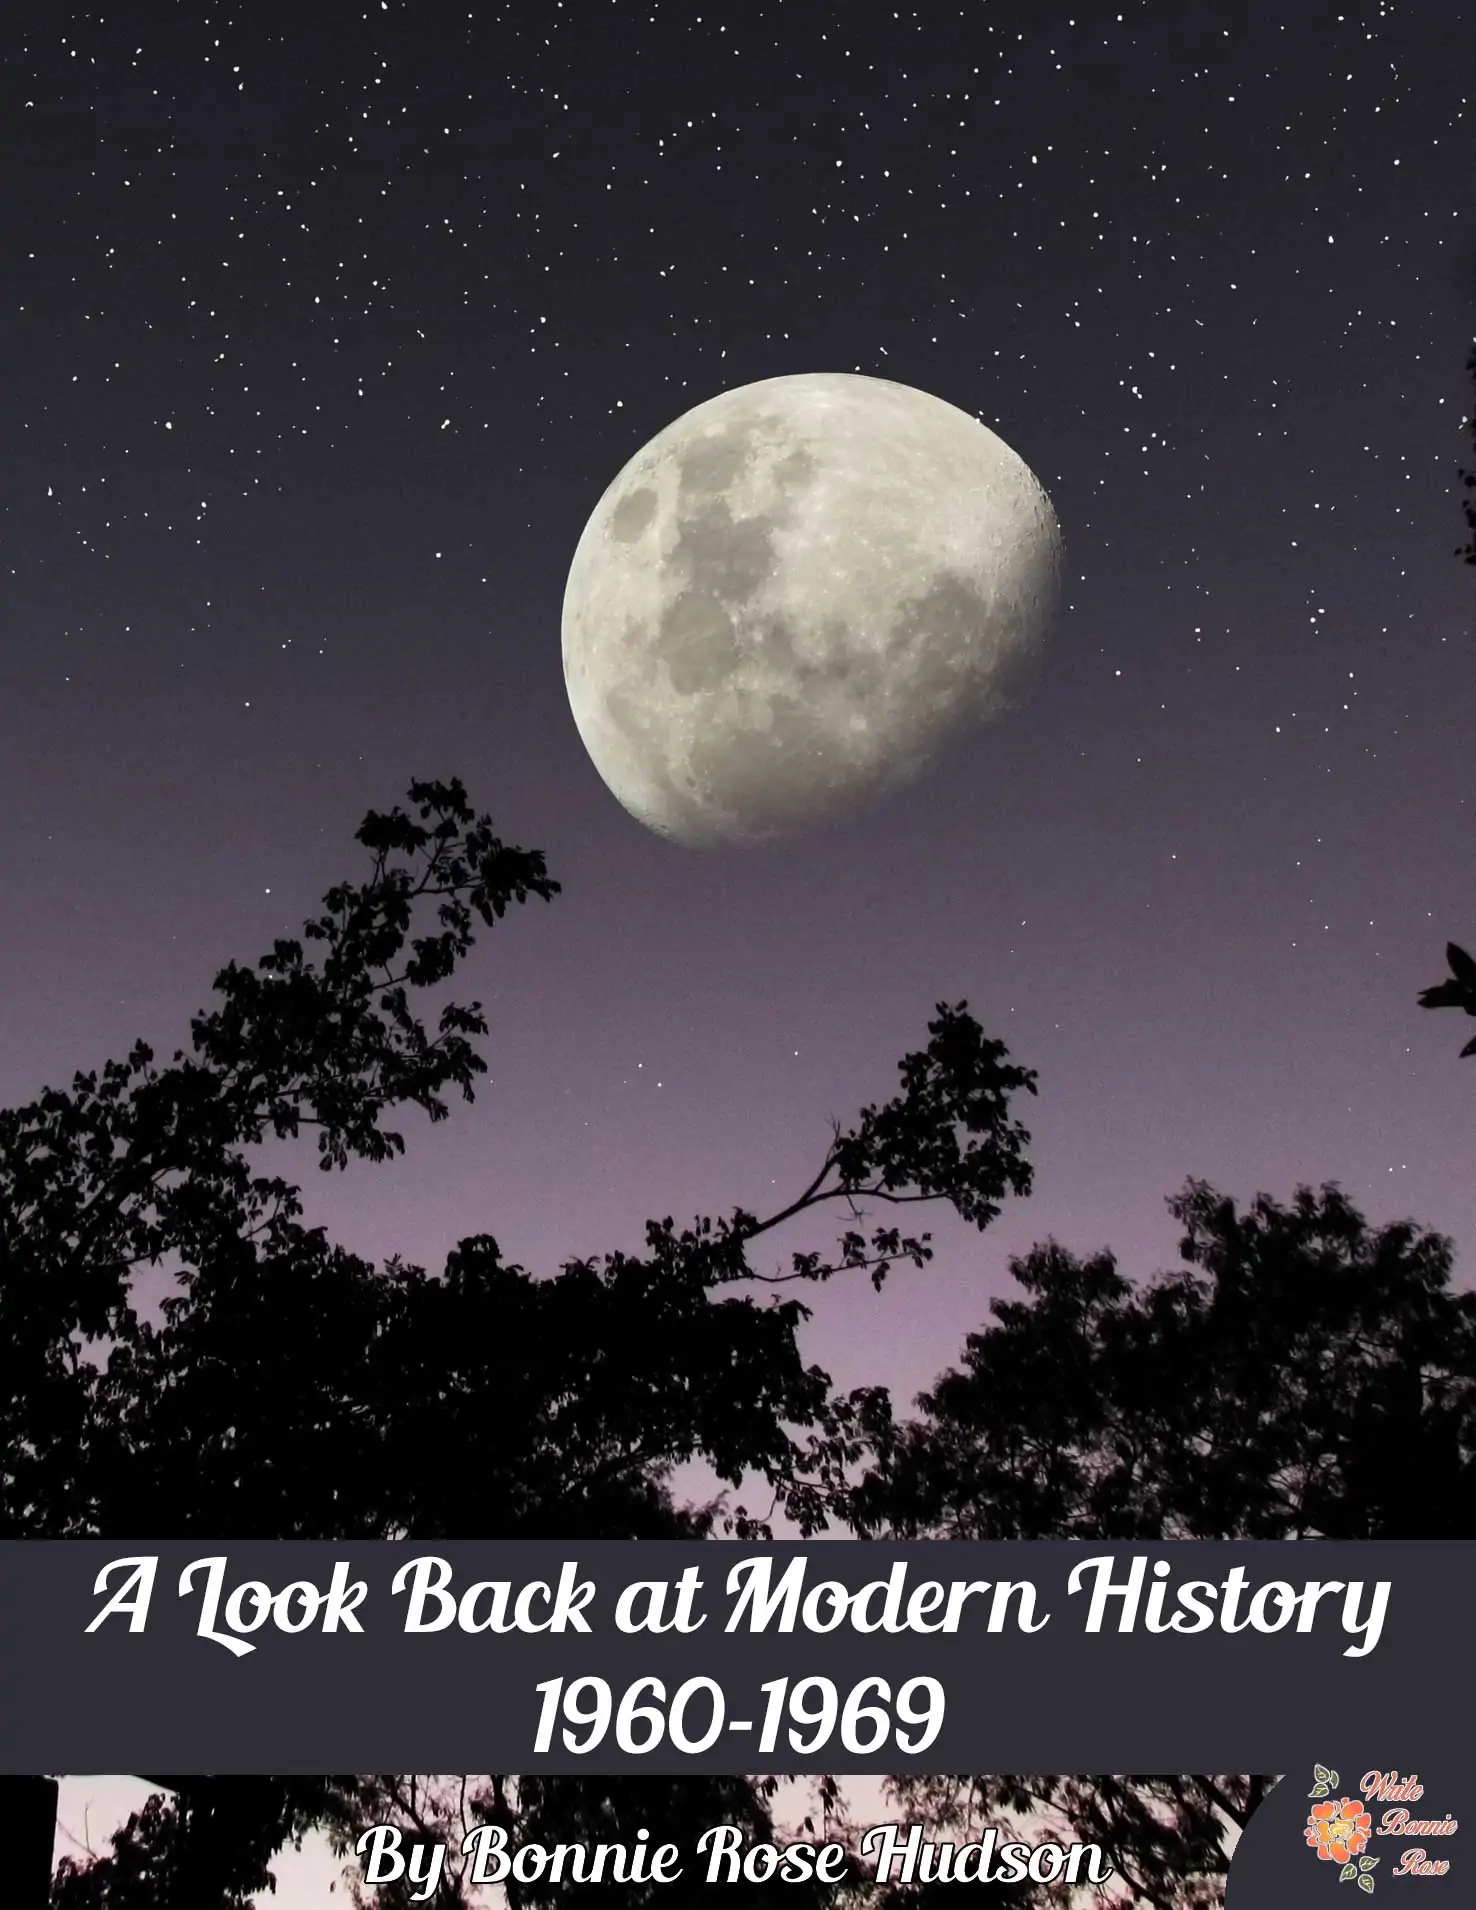 A Look Back at Modern History 1960s text with image of a moon late at night